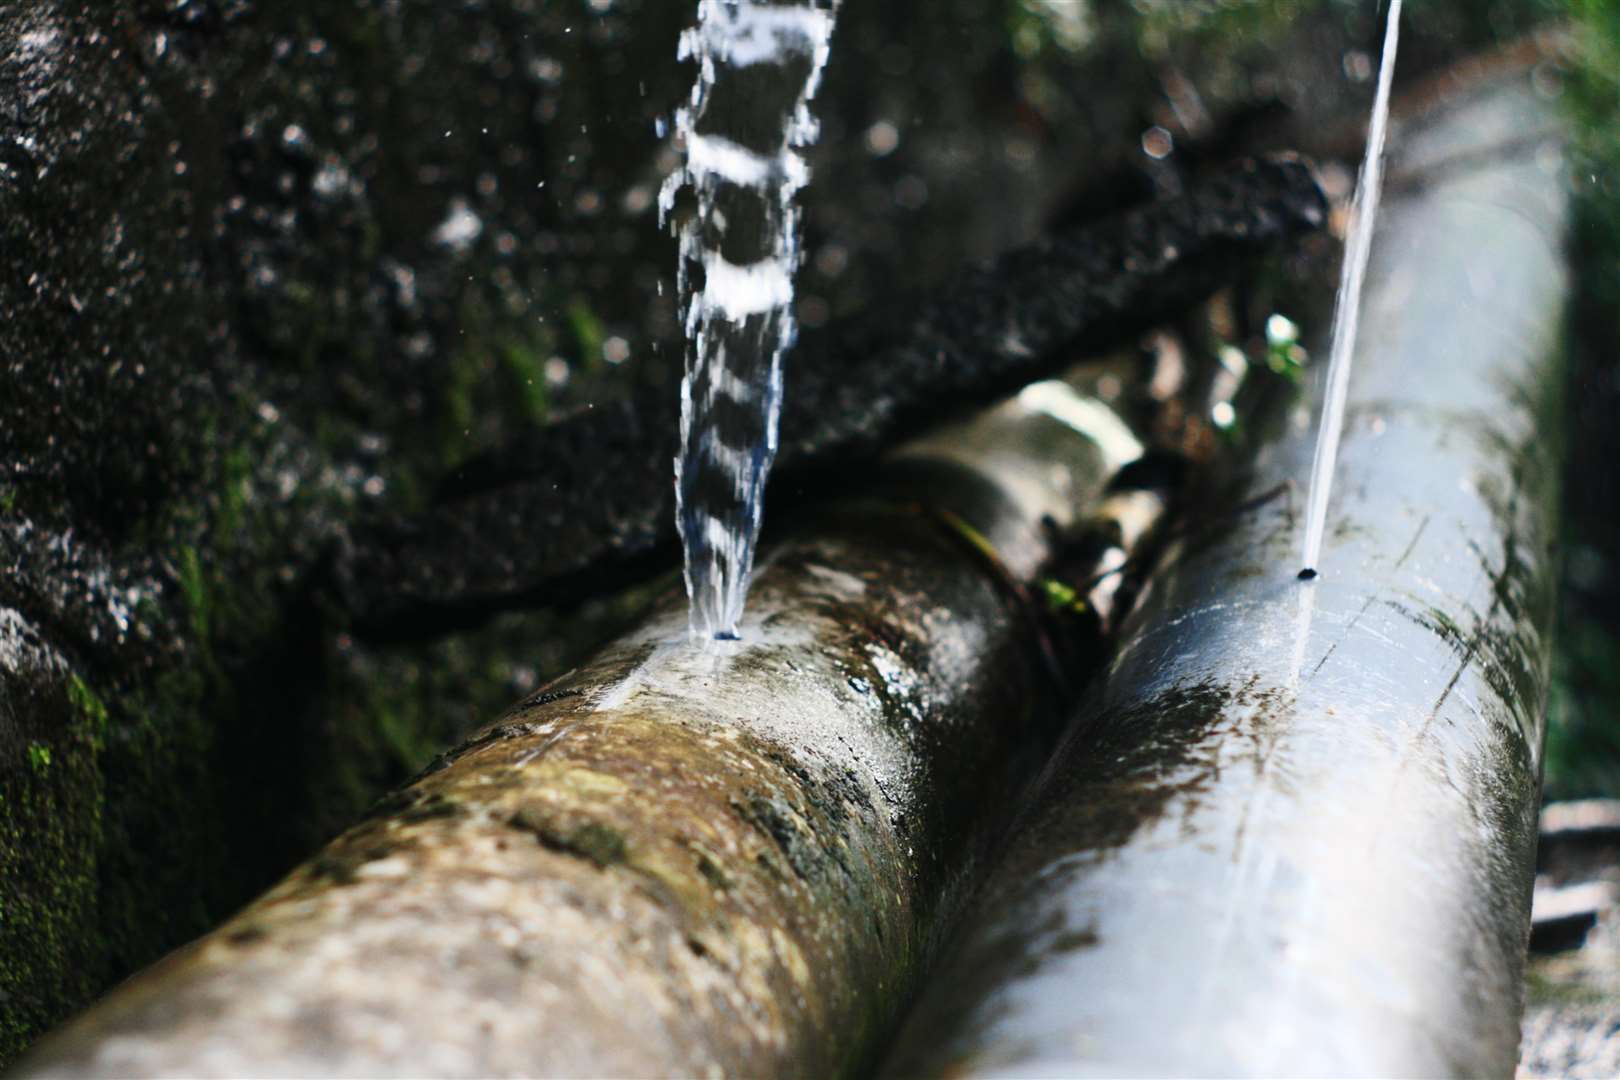 Burst pipes have lead to no water supply in Allhallows